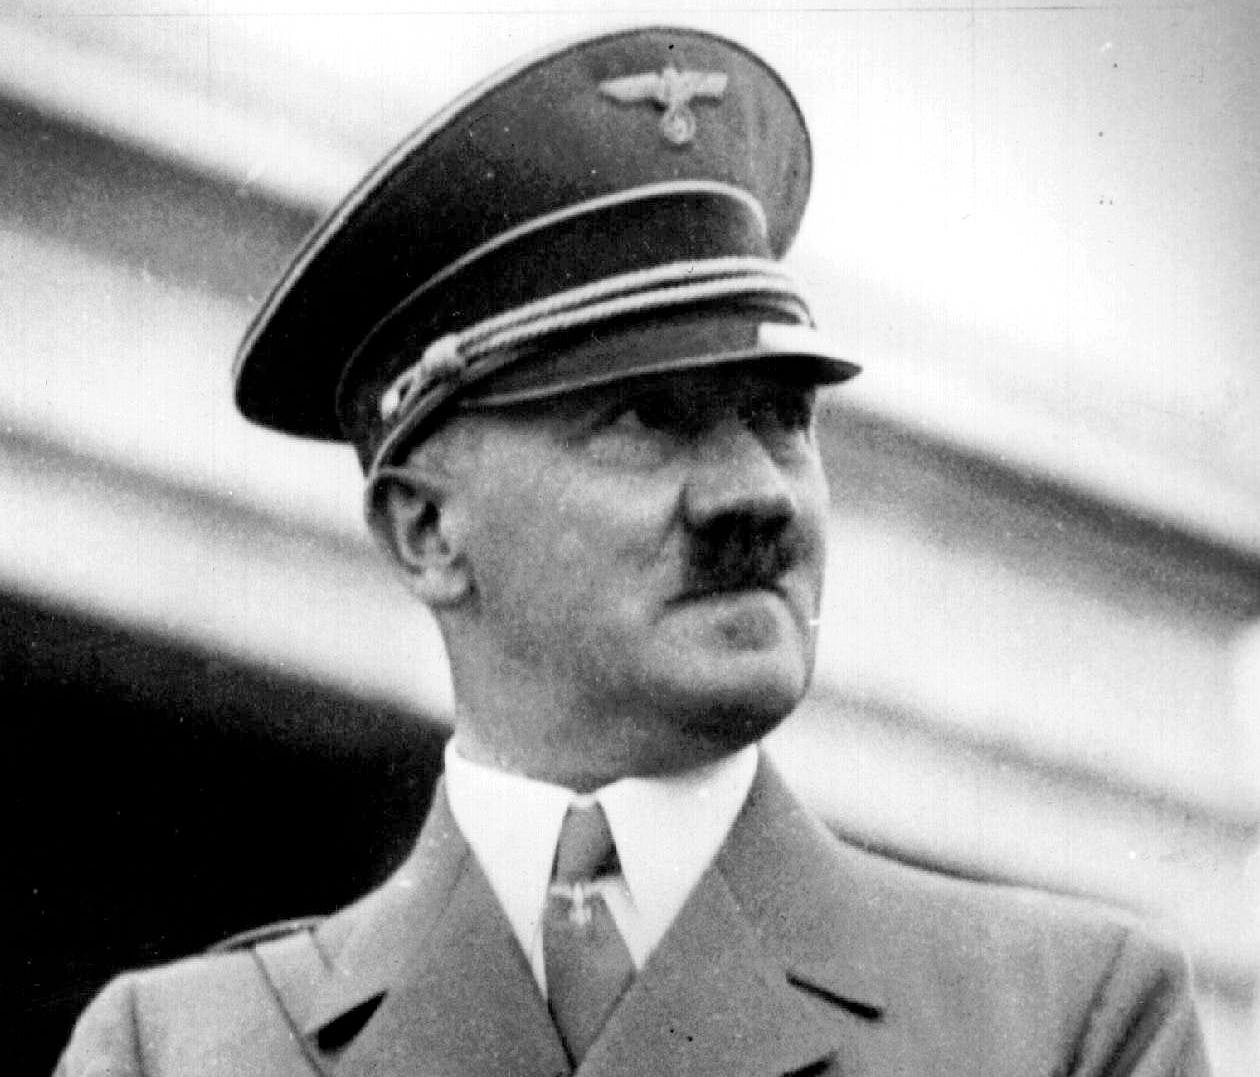 A huge trove of Nazi artifacts, some believed to have been connected to Adolf Hitler, have been found behind a hidden door in Argentina.